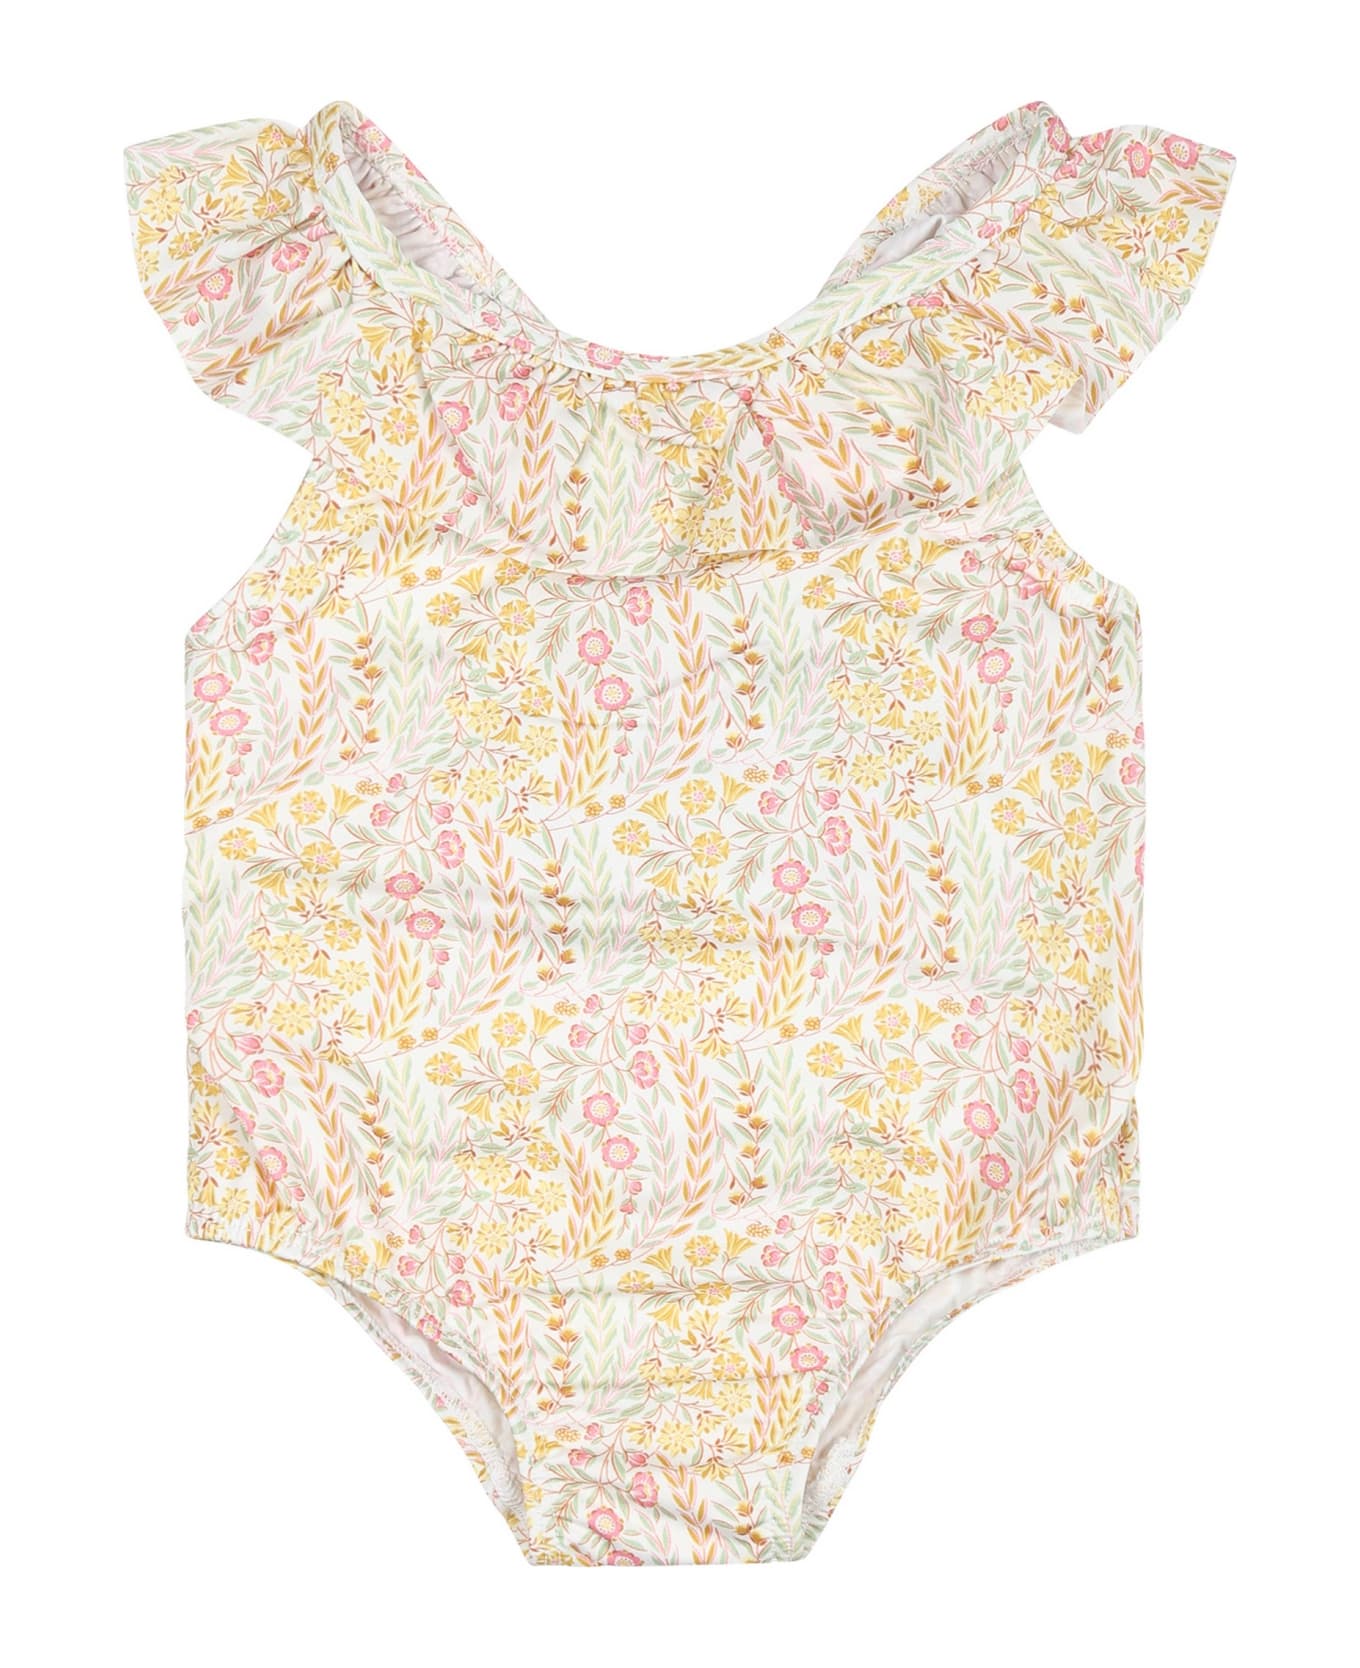 Tartine et Chocolat Ivory One-piece Swimsuit For Baby Girl With Liberty Fabric - Ivory